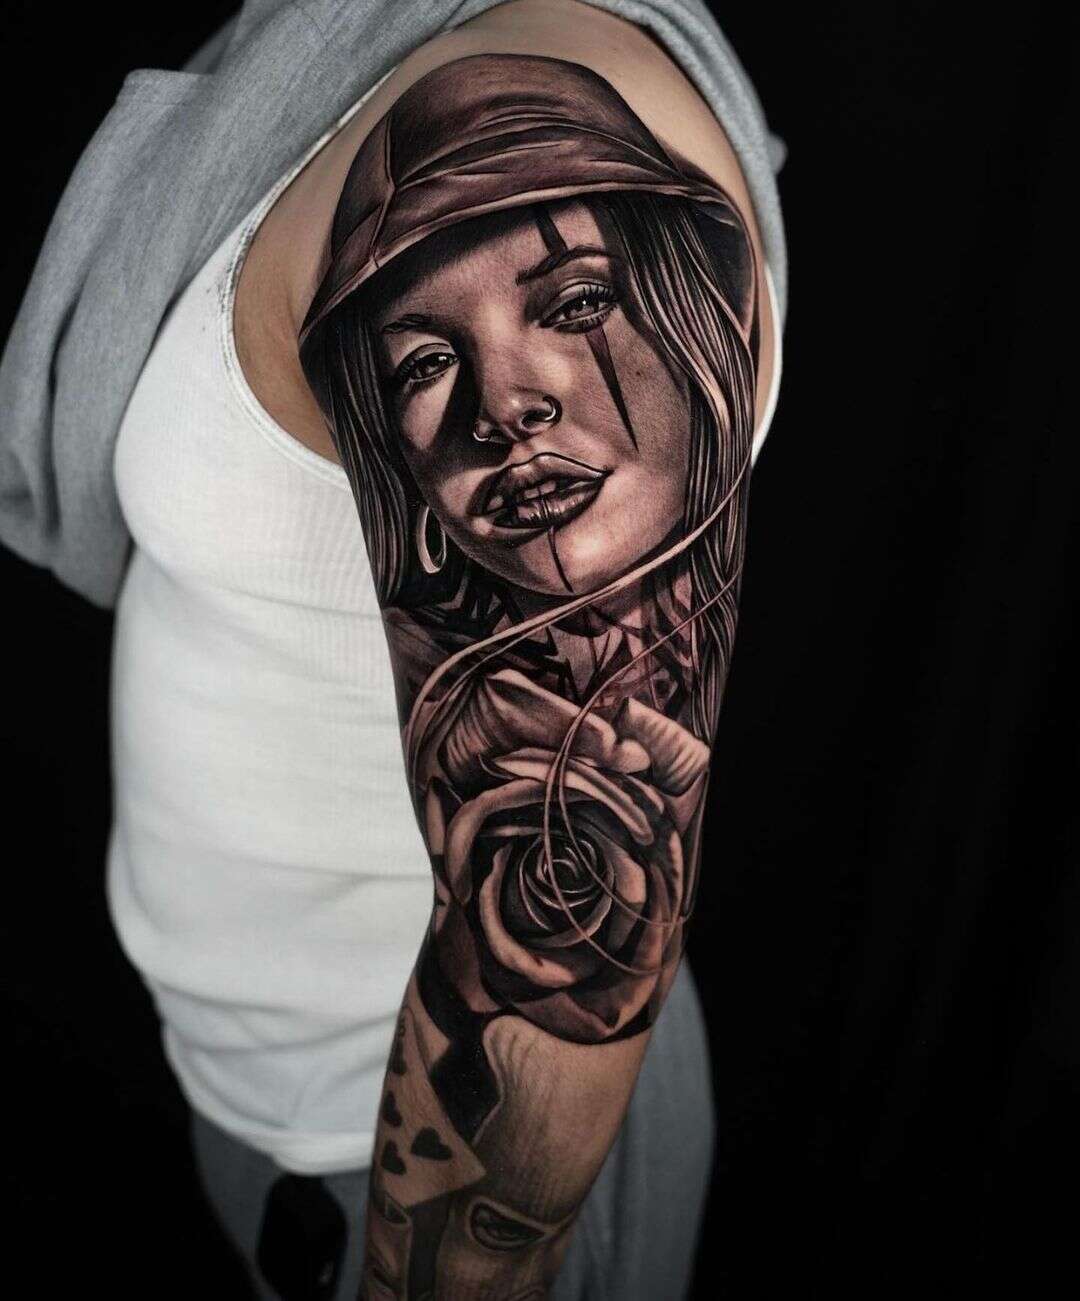 Steph - Black Magic Tattoo Studio - Loved doing this gangster girl forearm  portrait for Tom today! Finishing up around the back to complete his  existing sleeve next time 🖤 | Facebook